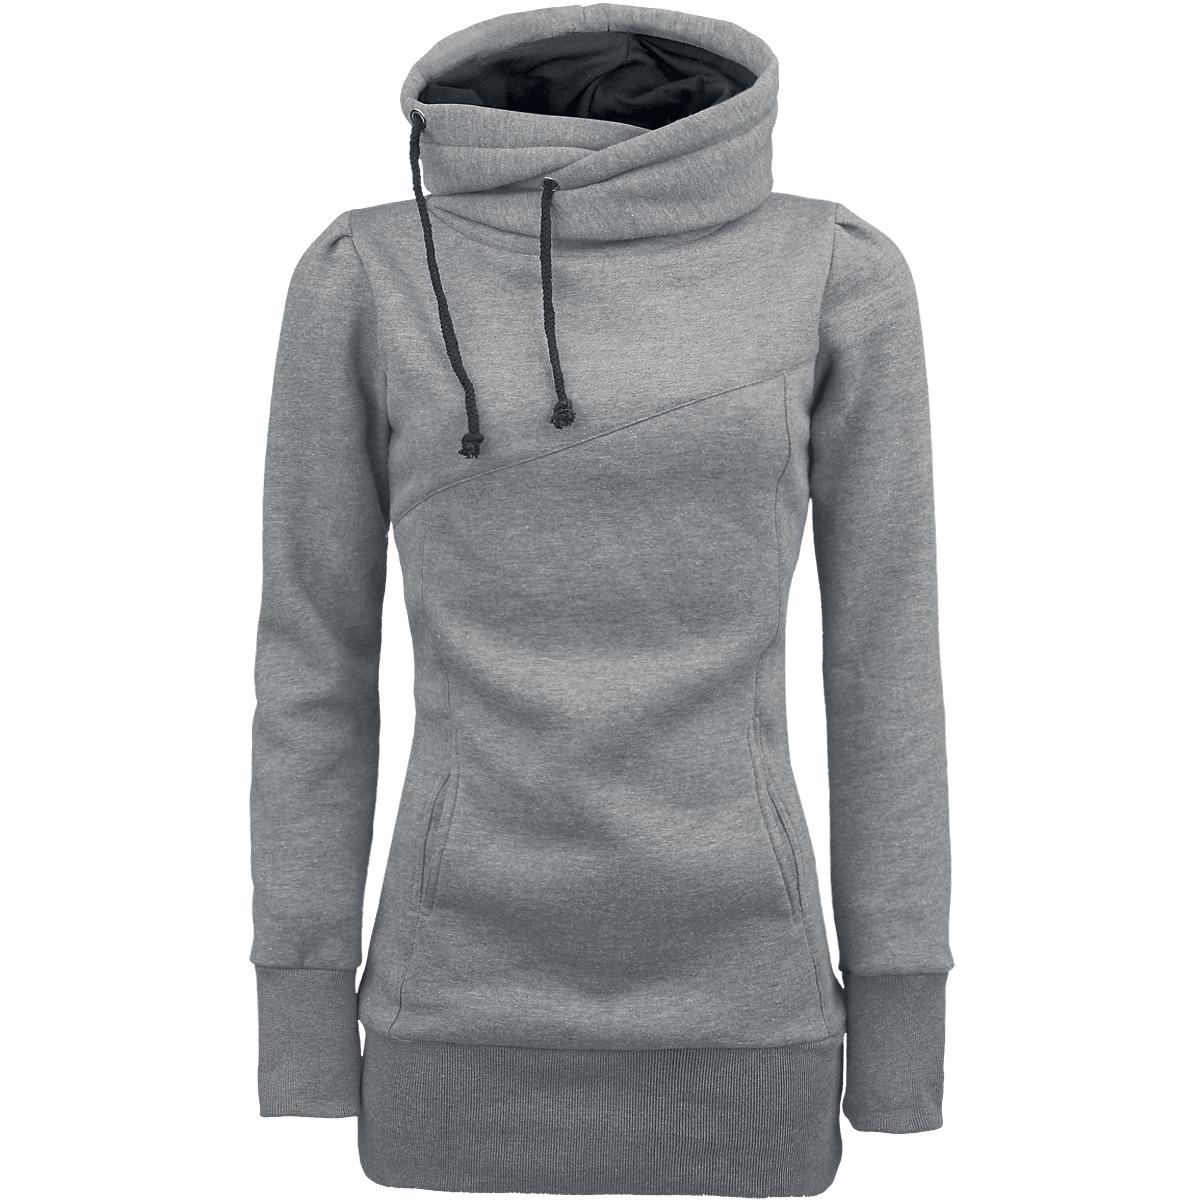 smart hoodie - forplay hooded sweater cnmnute